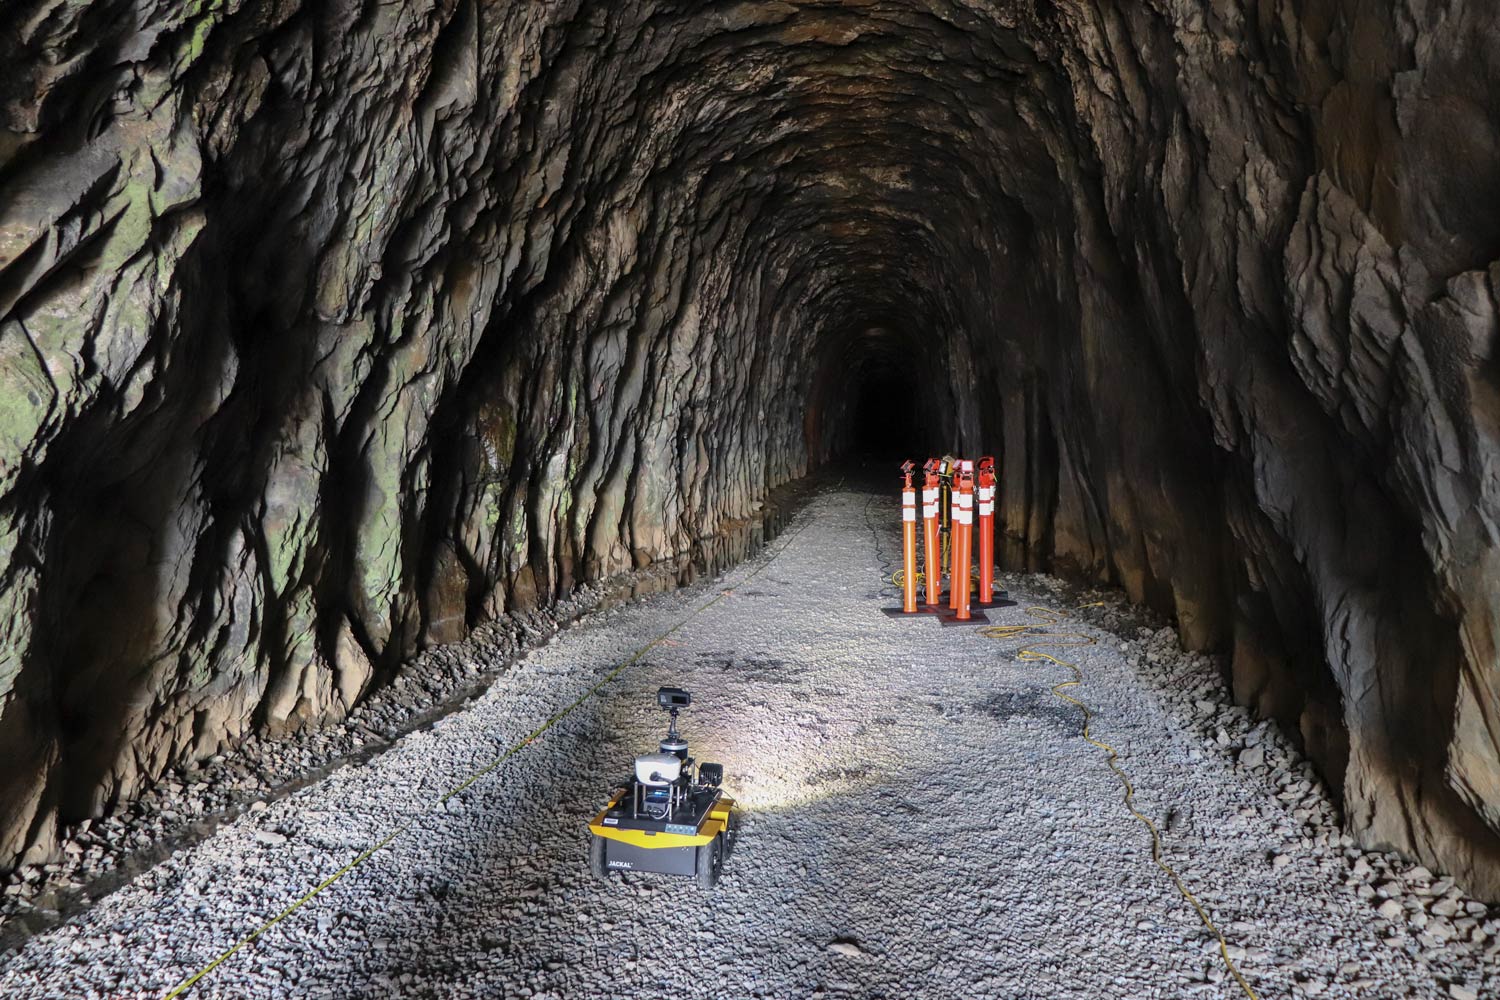 The robot enters the Crozet Tunnel to start its mapping process.